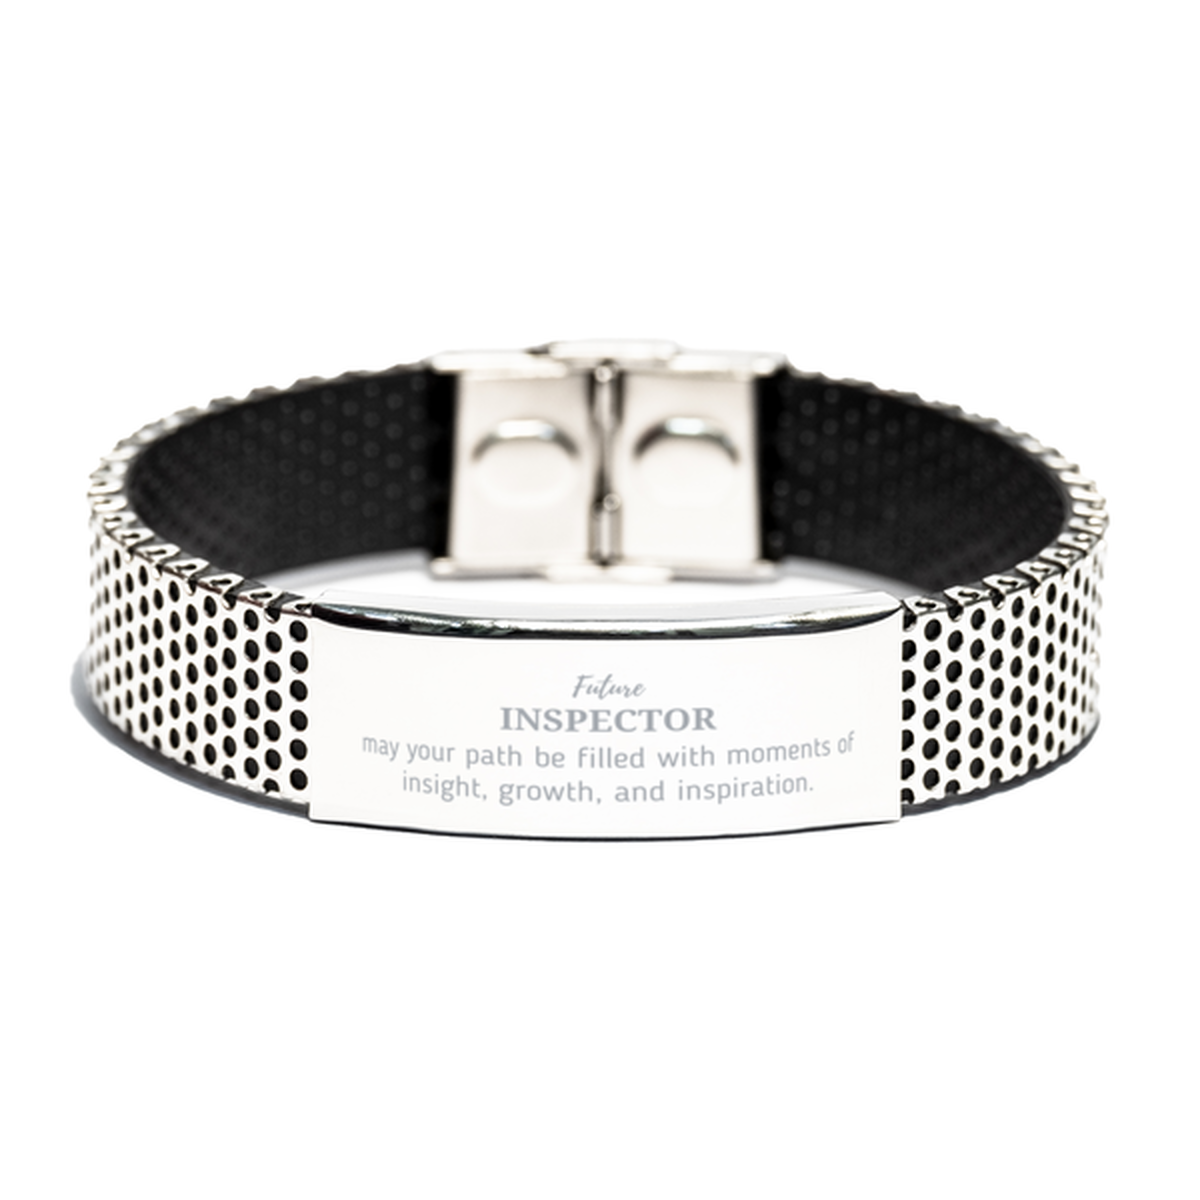 Future Inspector Gifts, May your path be filled with moments of insight, Graduation Gifts for New Inspector, Christmas Unique Stainless Steel Bracelet For Men, Women, Friends